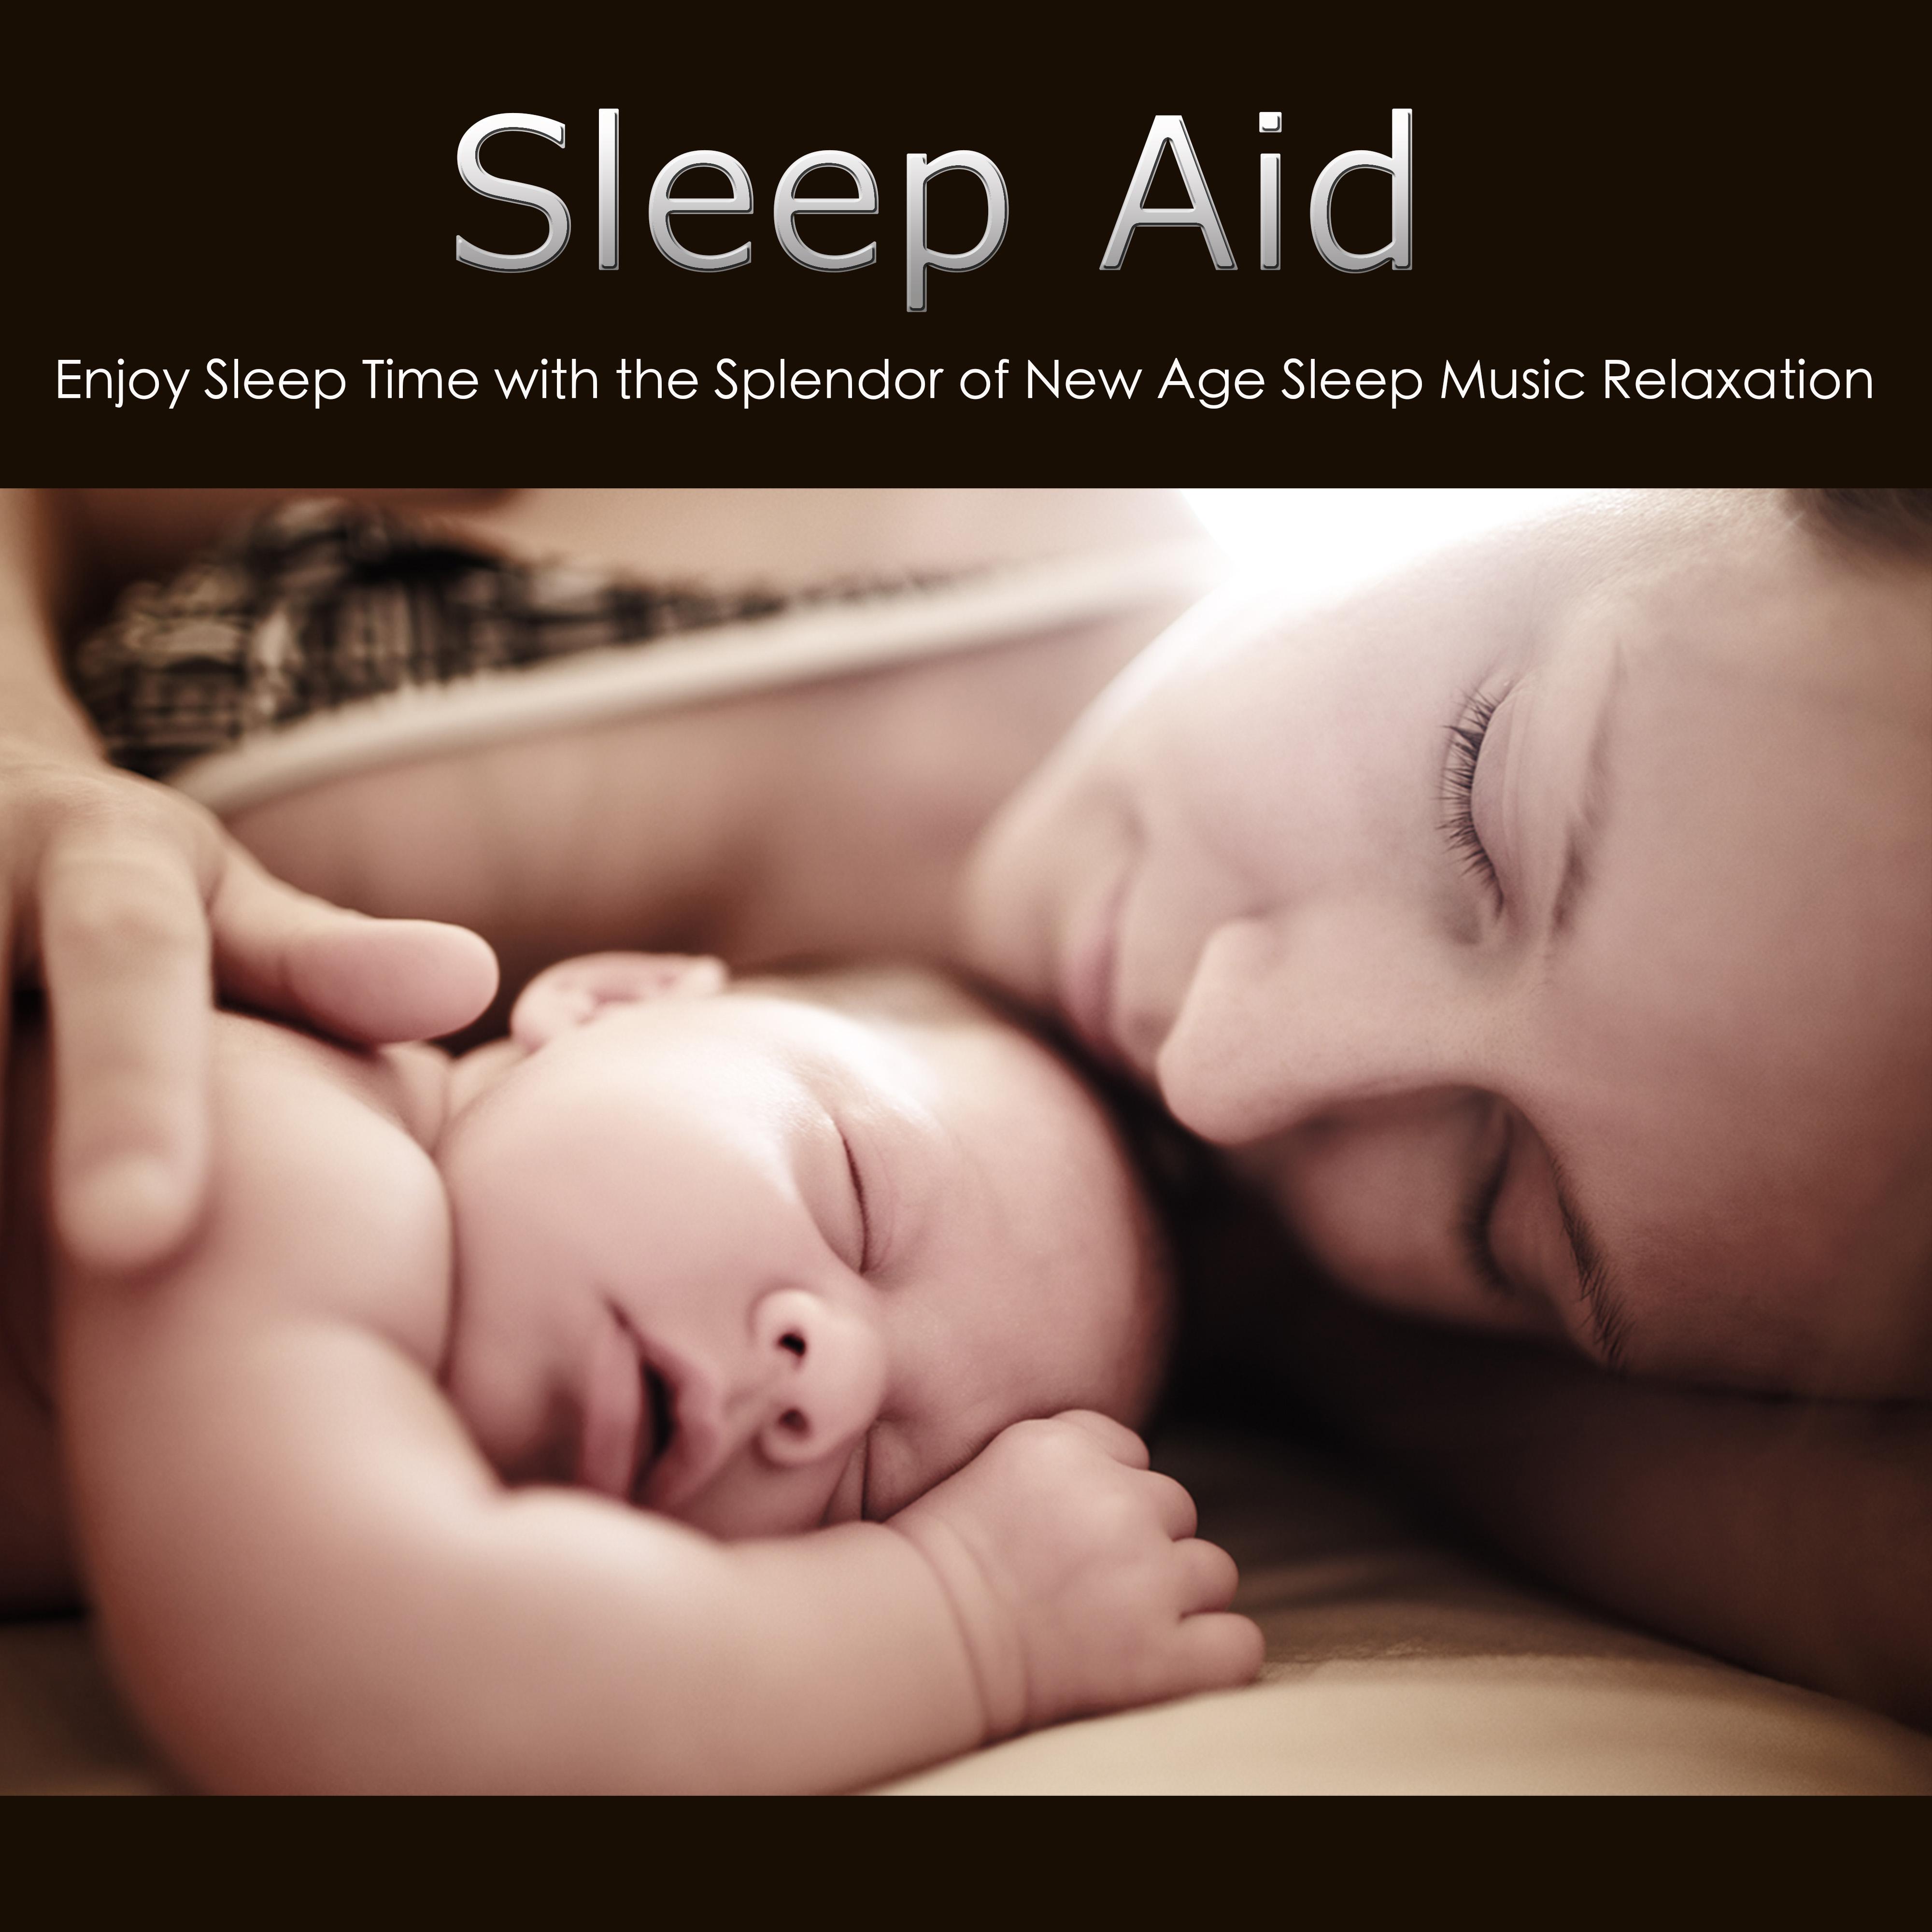 Sleep Time, Most Relaxing New Age Music